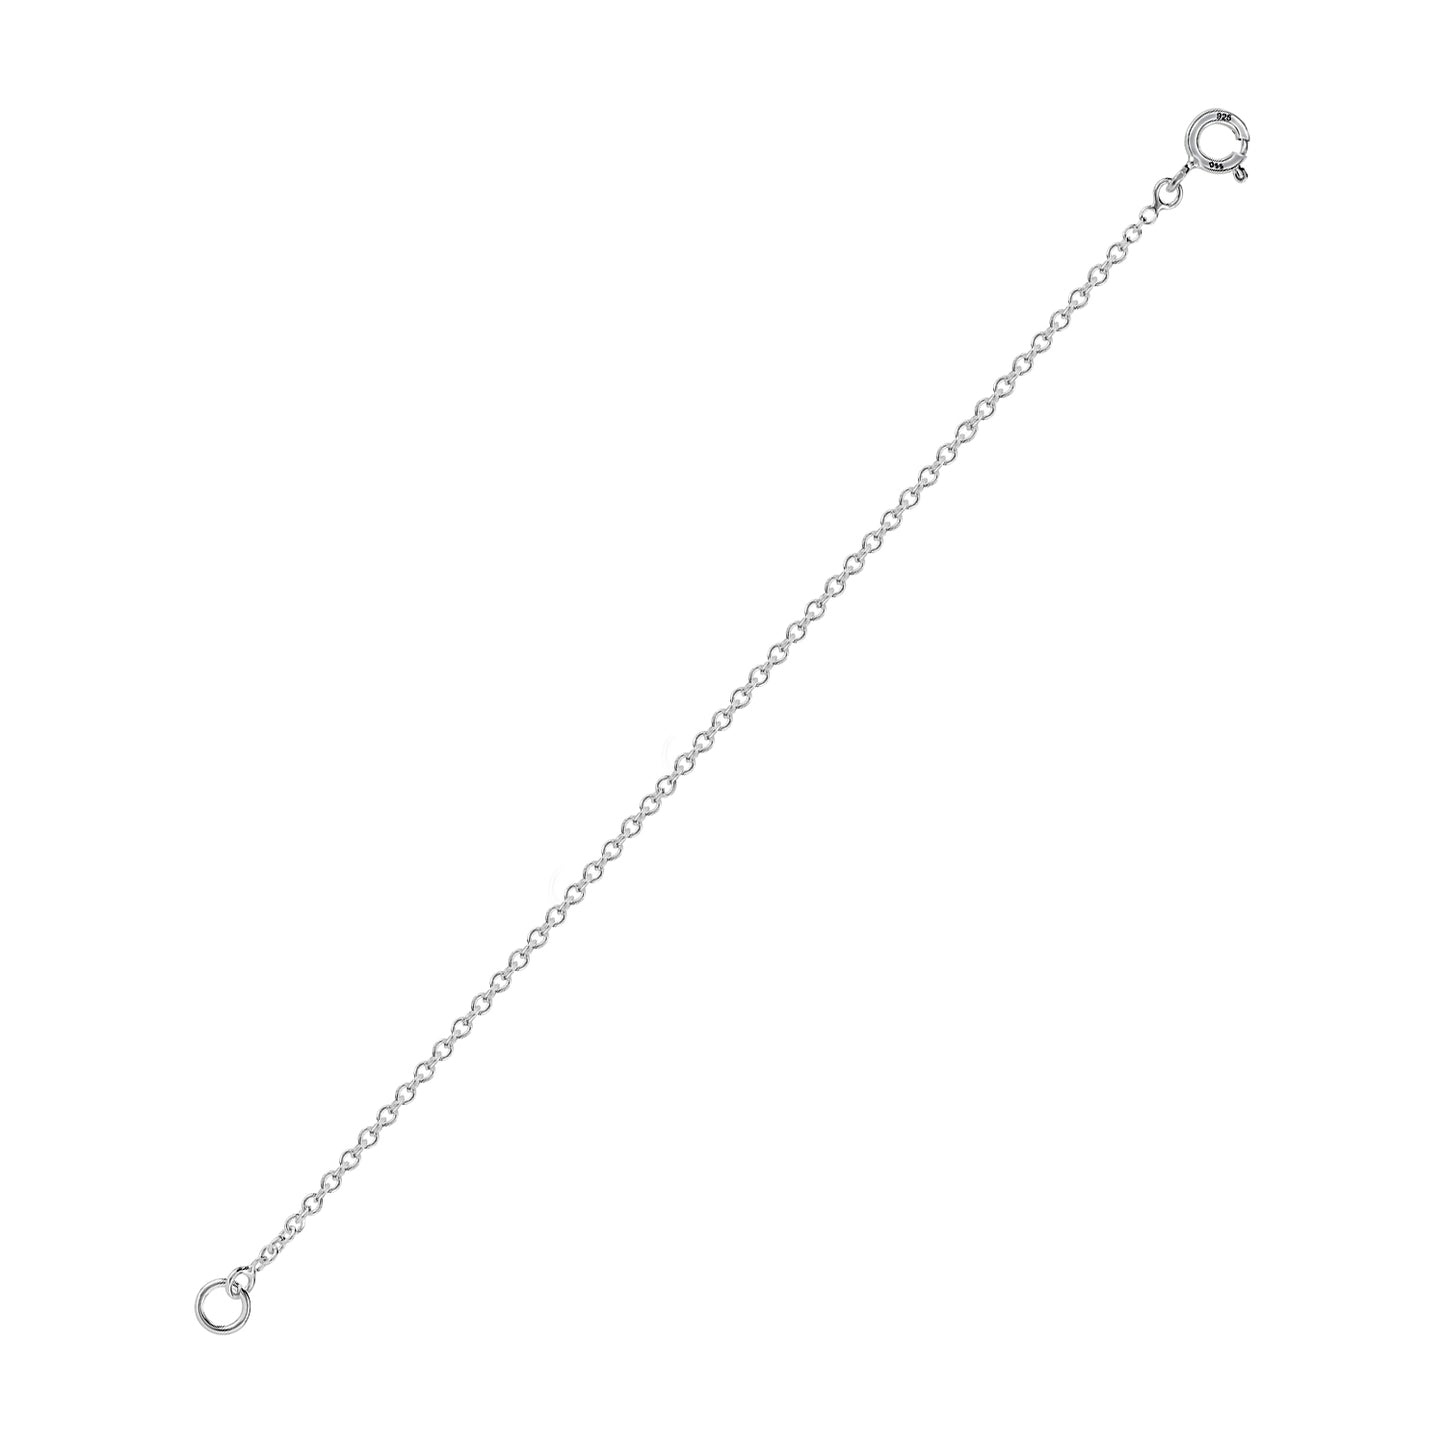 925 Sterling Silver 1.2MM-Extender Chain - 1" to 6" Inch Super Thin & Strong With 5MM End Ring …